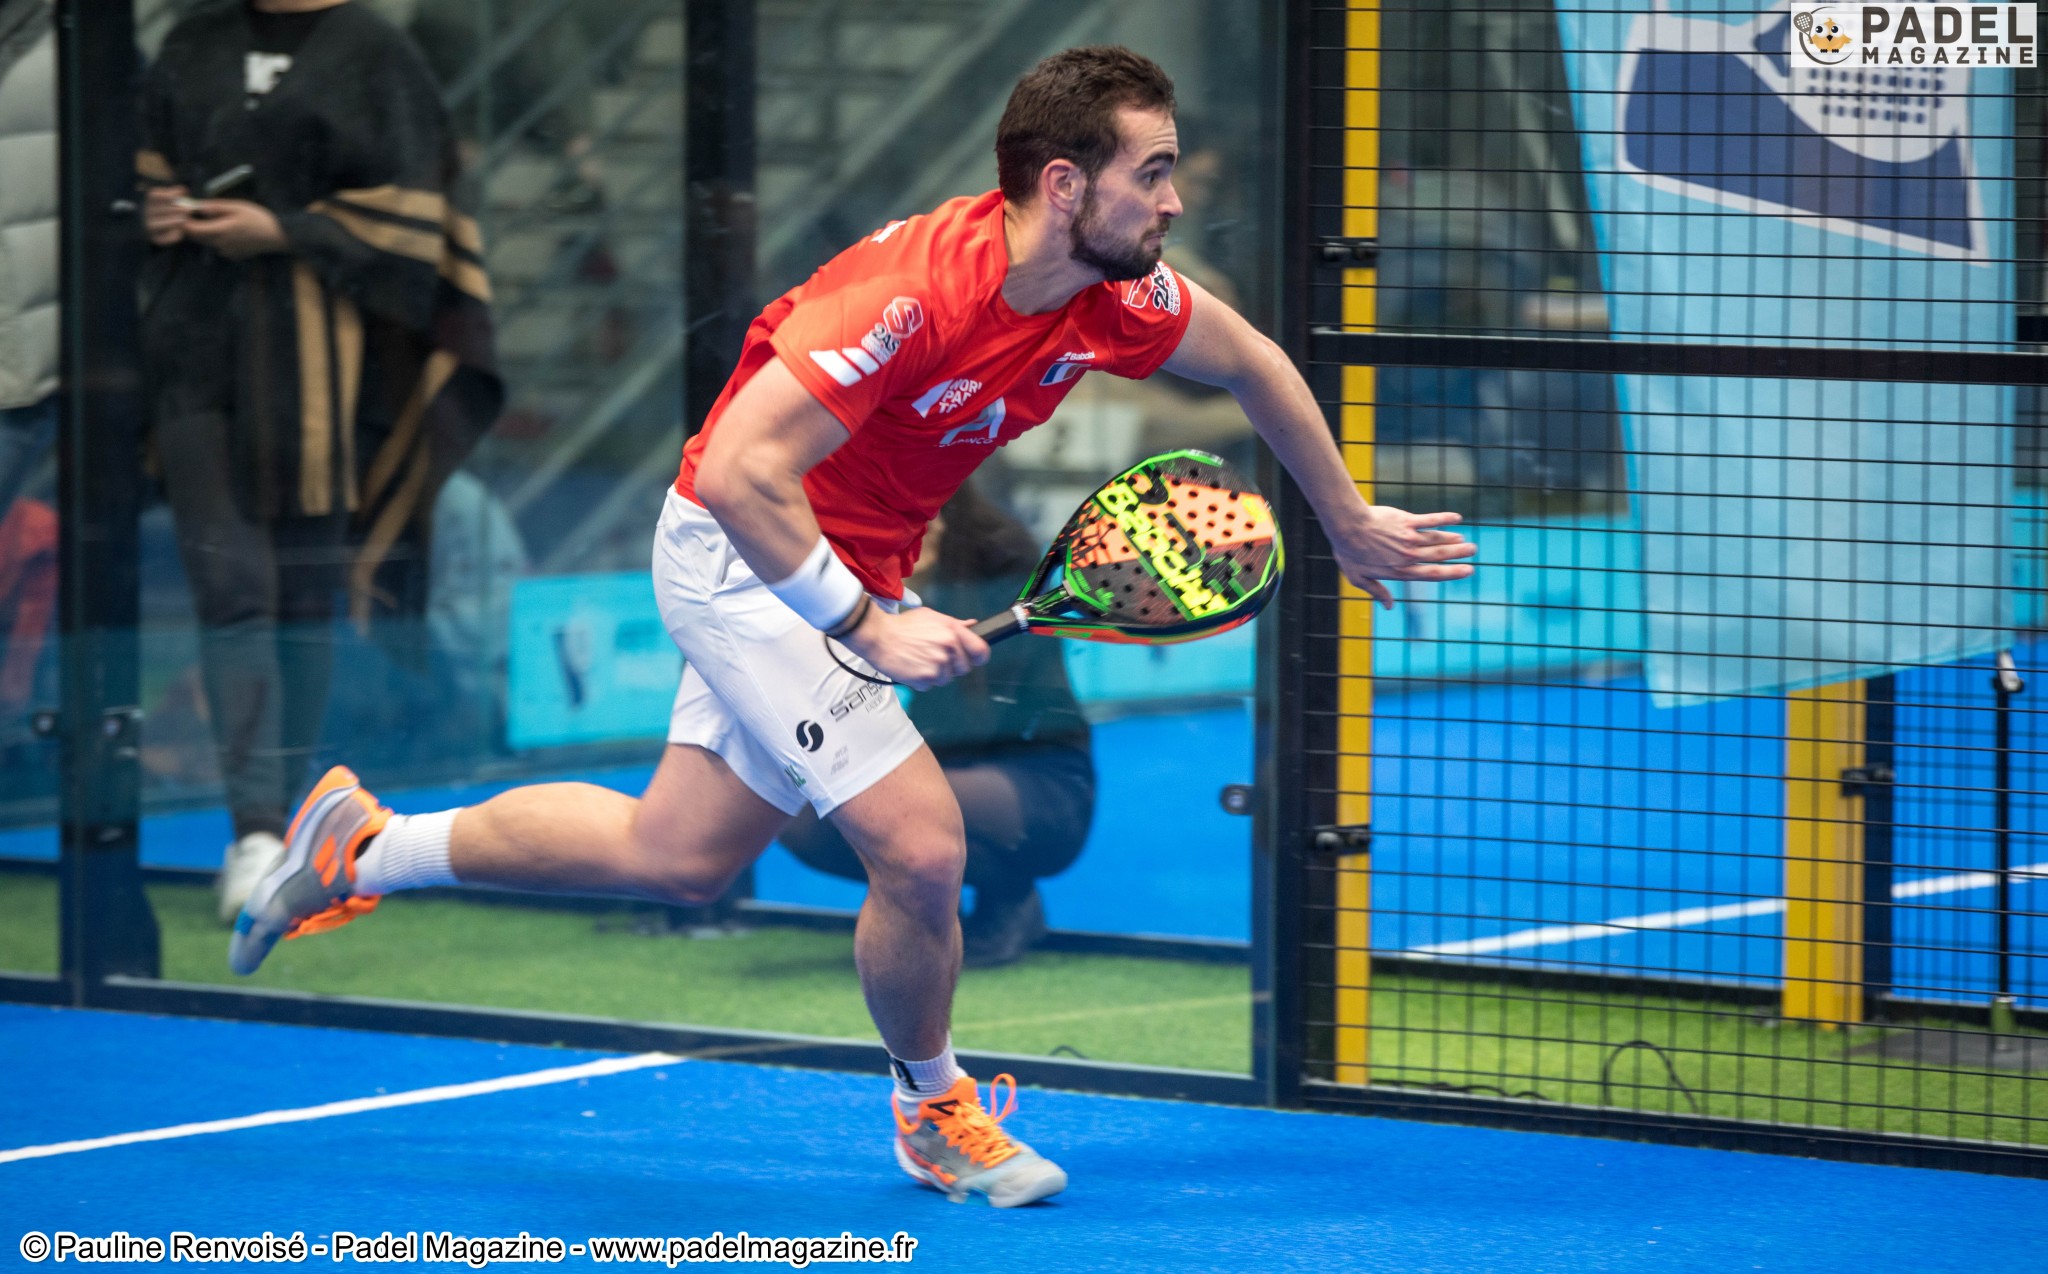 A player of padel runs an average of 2,39 km / h